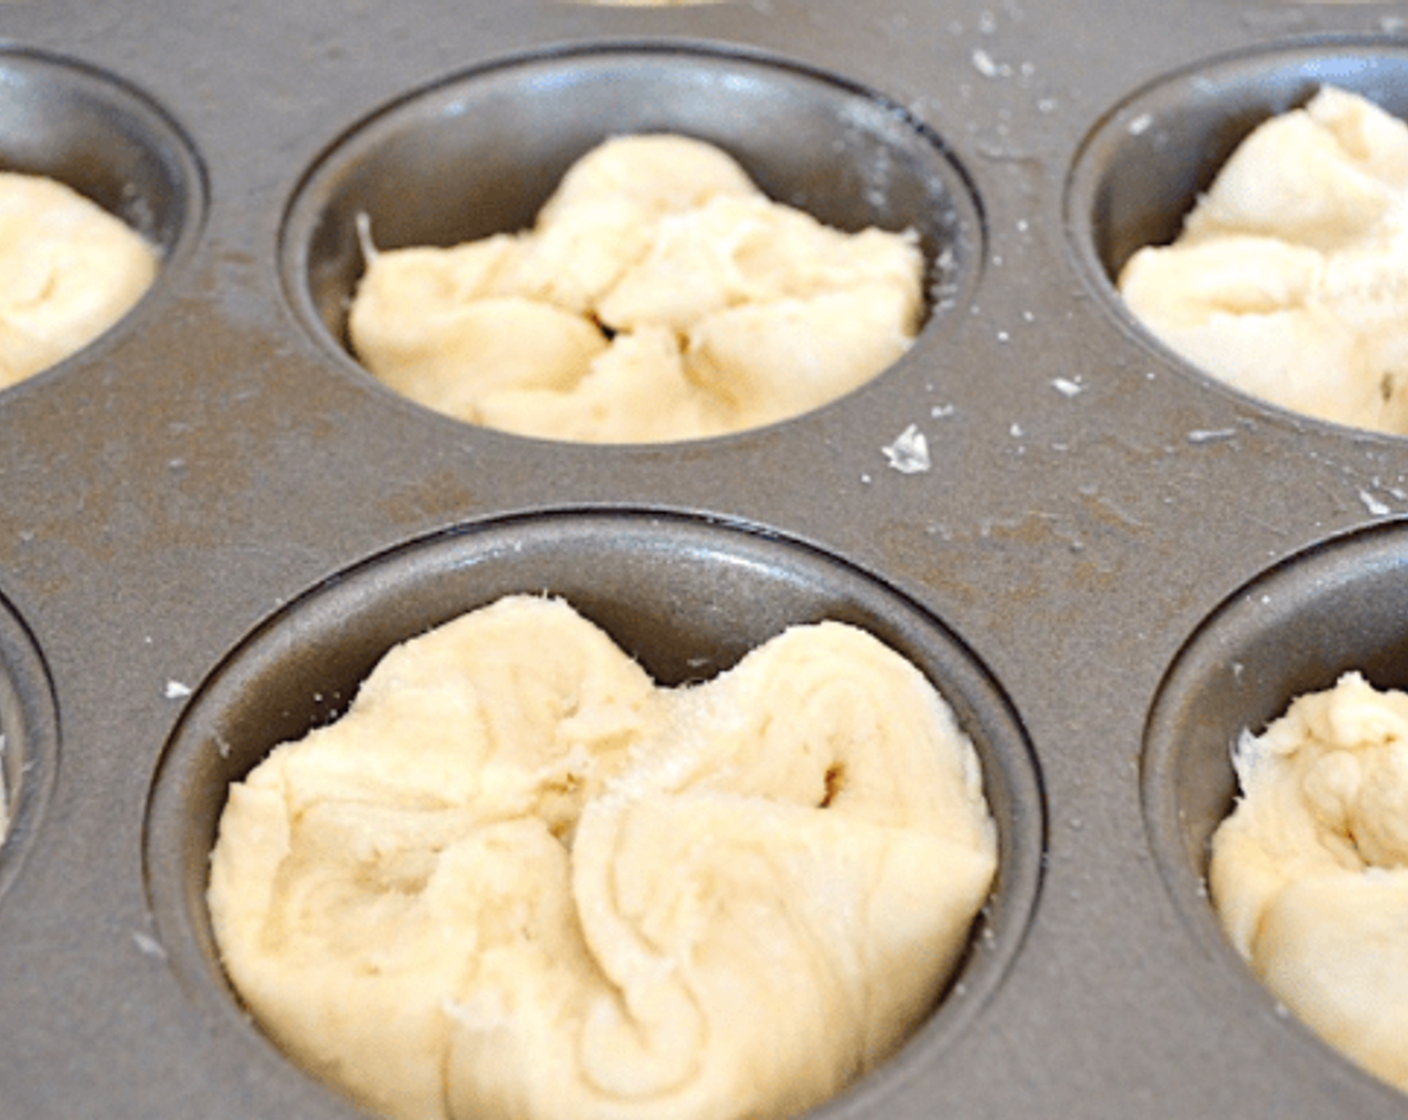 step 11 Put a square of dough into each well. Bring the corners of the square into the center so that each of the kouign amann look like little four leaf clovers. Sprinkle the tops generously with more granulated sugar. Put the tin aside to rise for another 30 minutes.